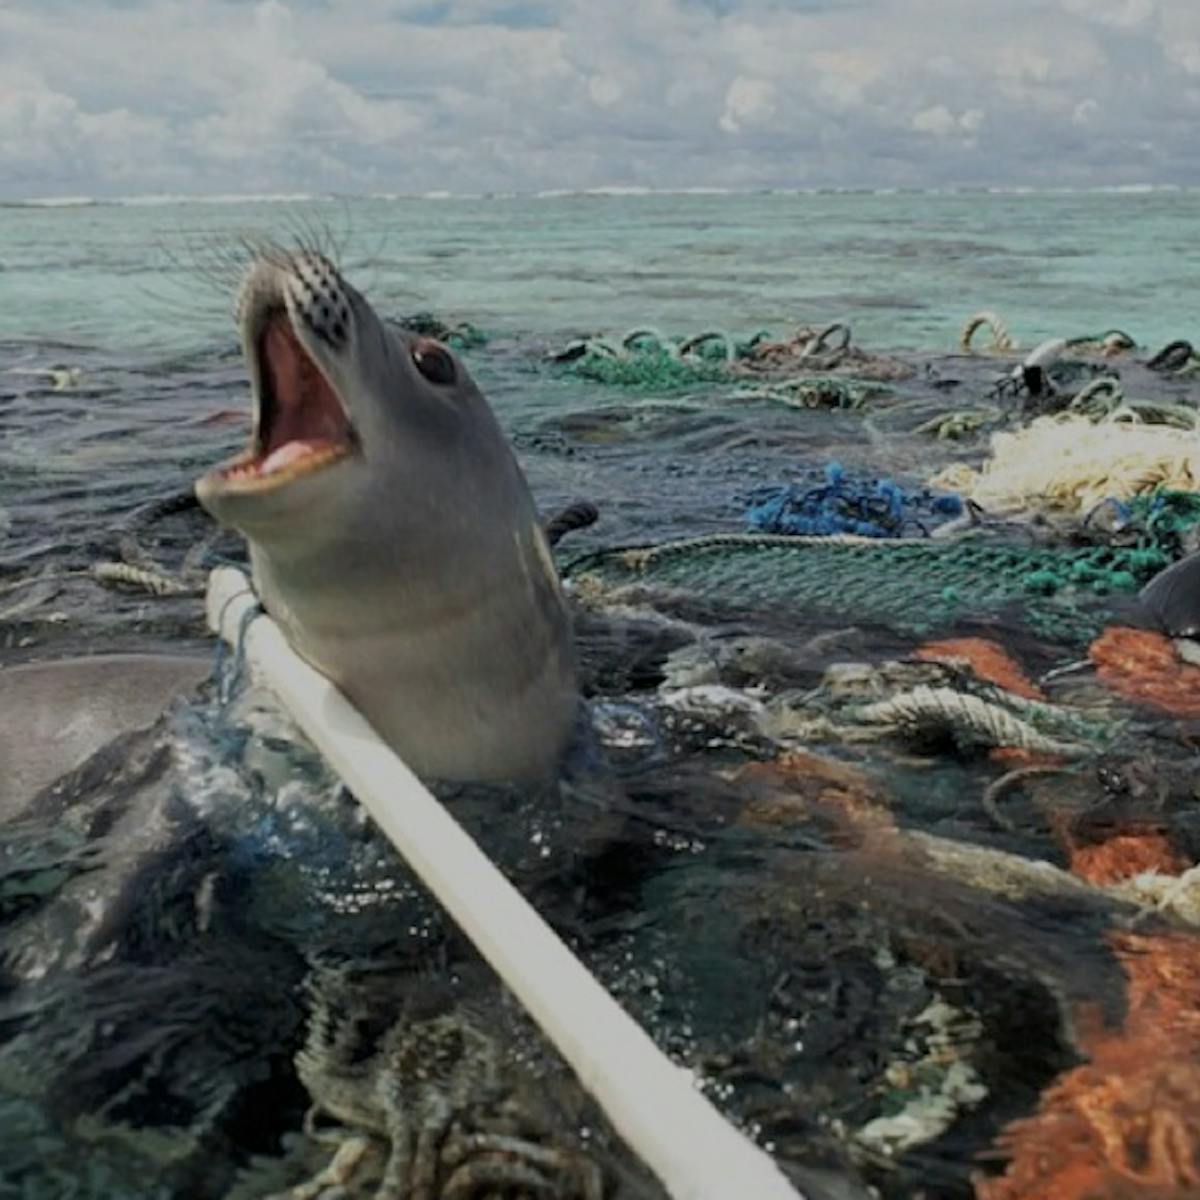 Marine debris: biodiversity impacts and potential solutions